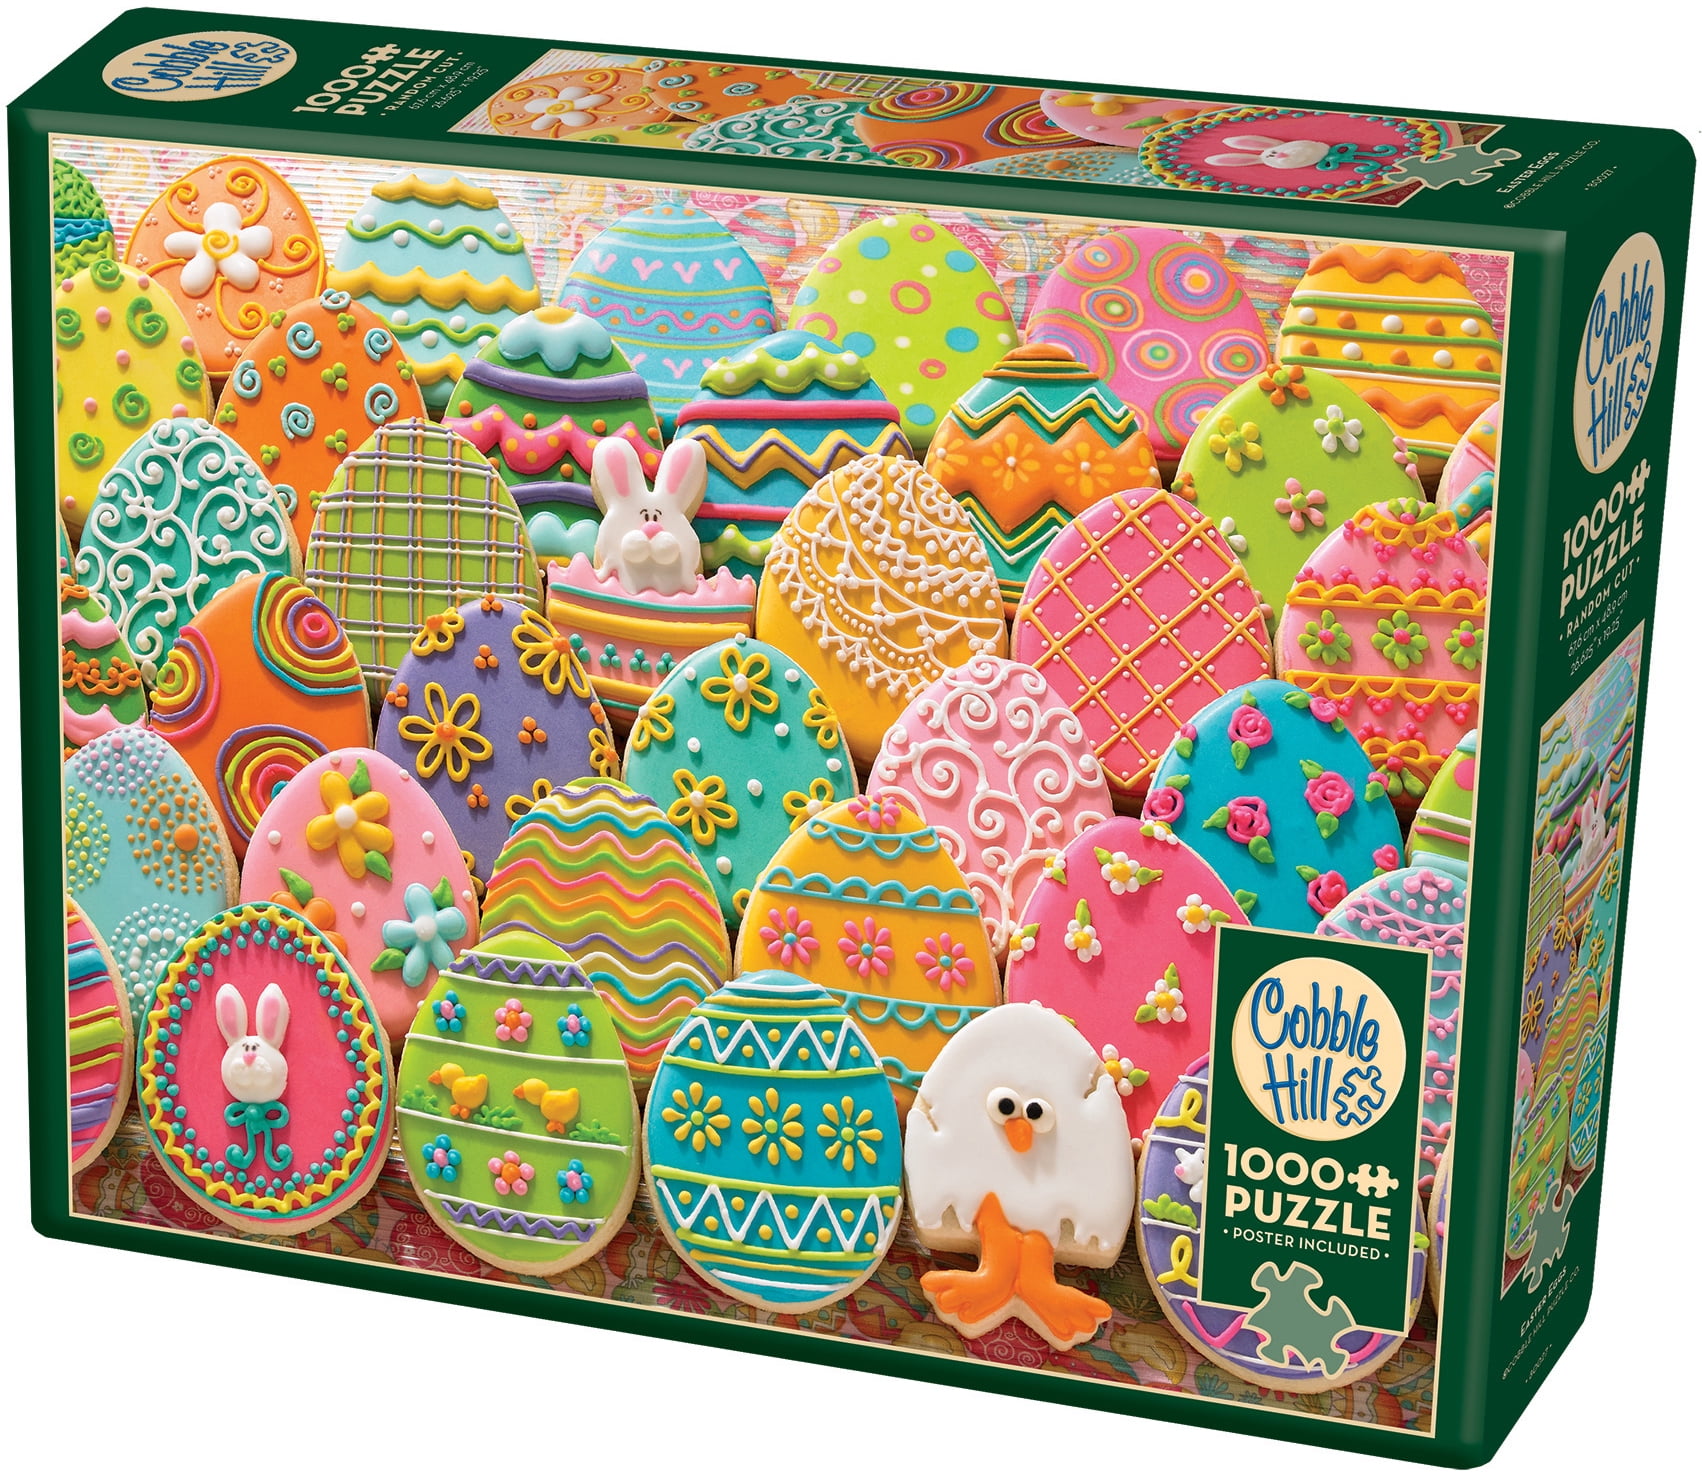 1000 PIECE JIGSAW PUZZLE Eggs For Sale The House Of Puzzles 